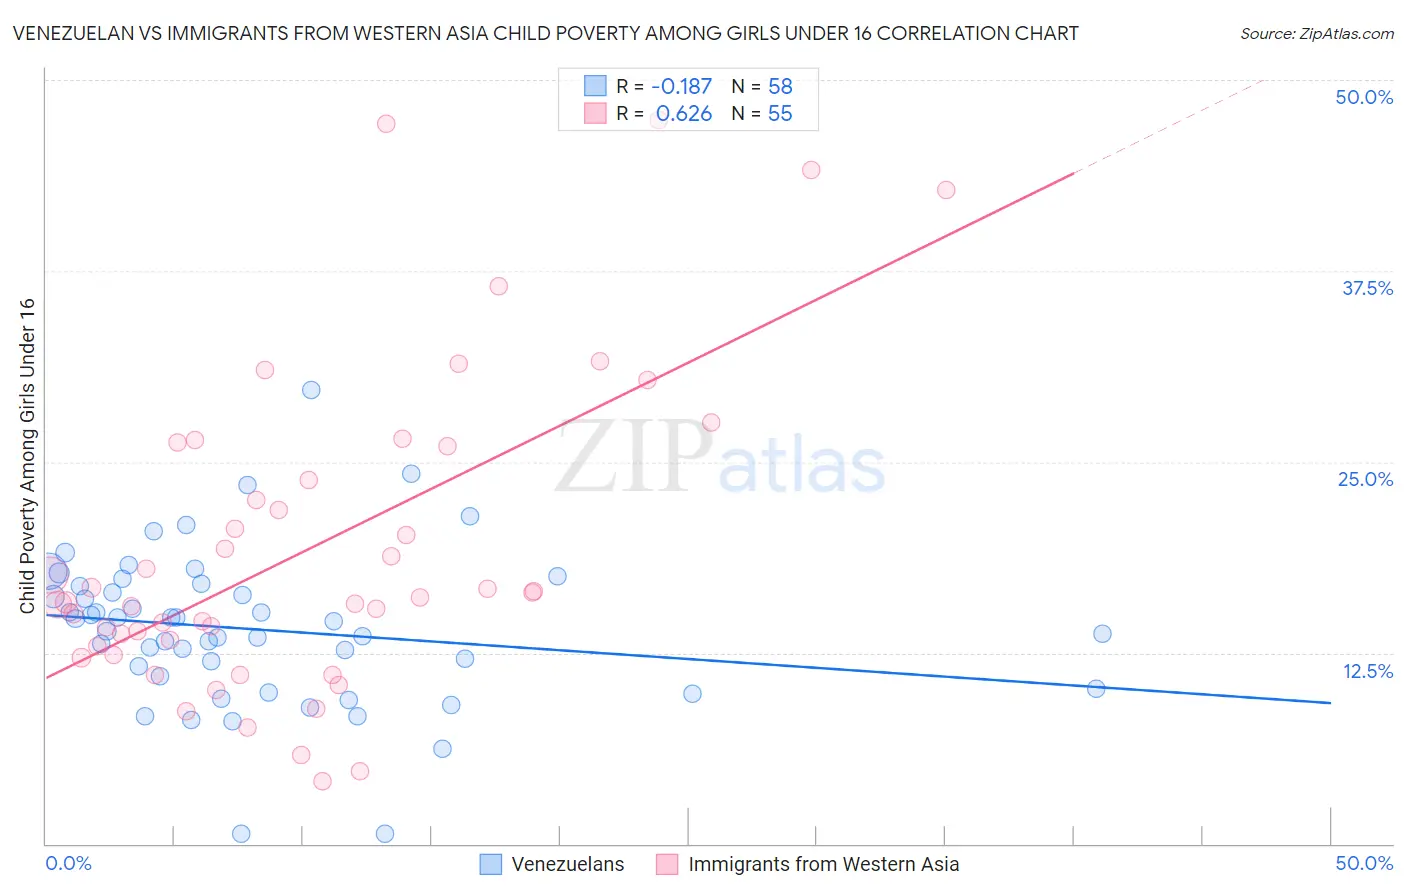 Venezuelan vs Immigrants from Western Asia Child Poverty Among Girls Under 16